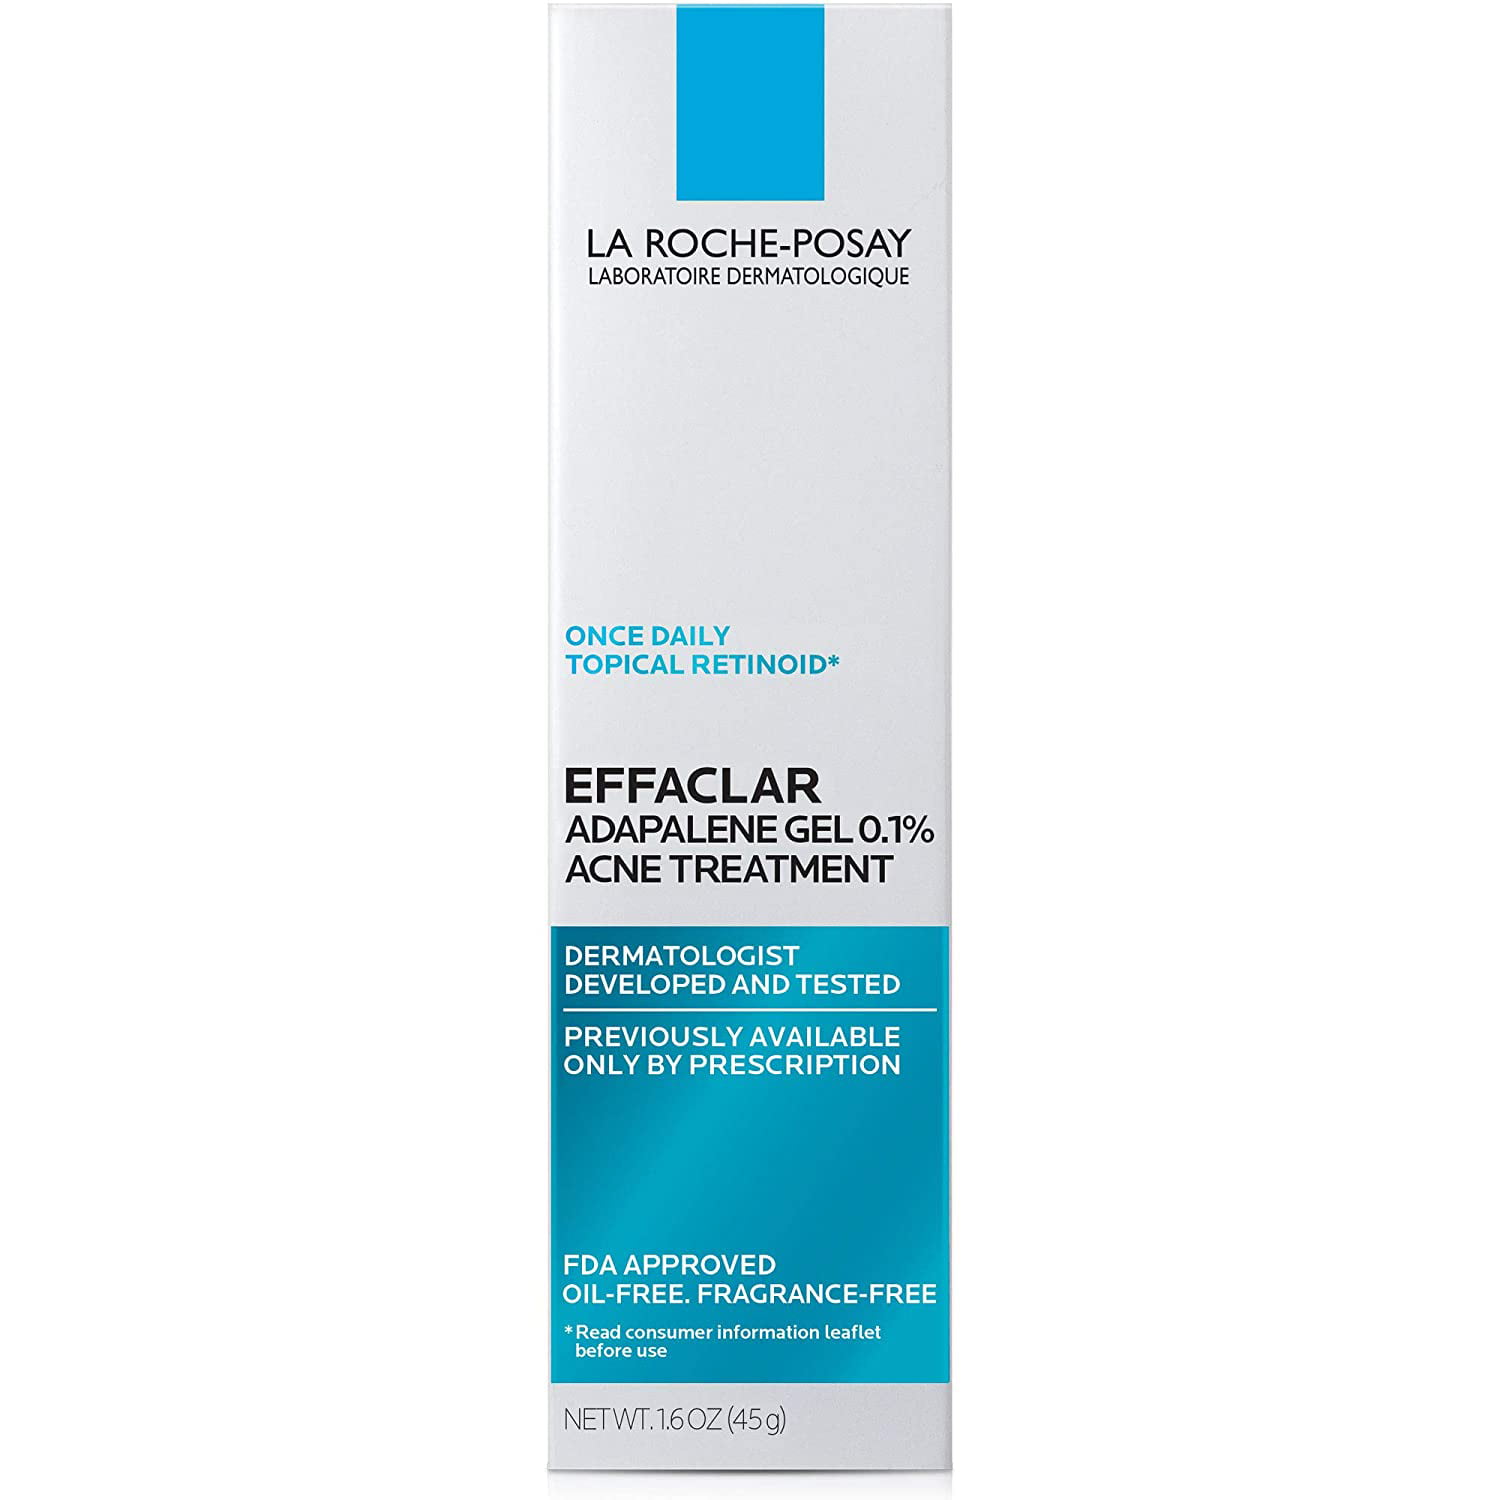 La Roche-Posay CAIMAN Effaclar Gel 0.1% Acne Treatment, Prescription-Strength Topical Retinoid Cream For Face, Helps Clear and Prevent Acne and Clogged Pores - Walmart.com